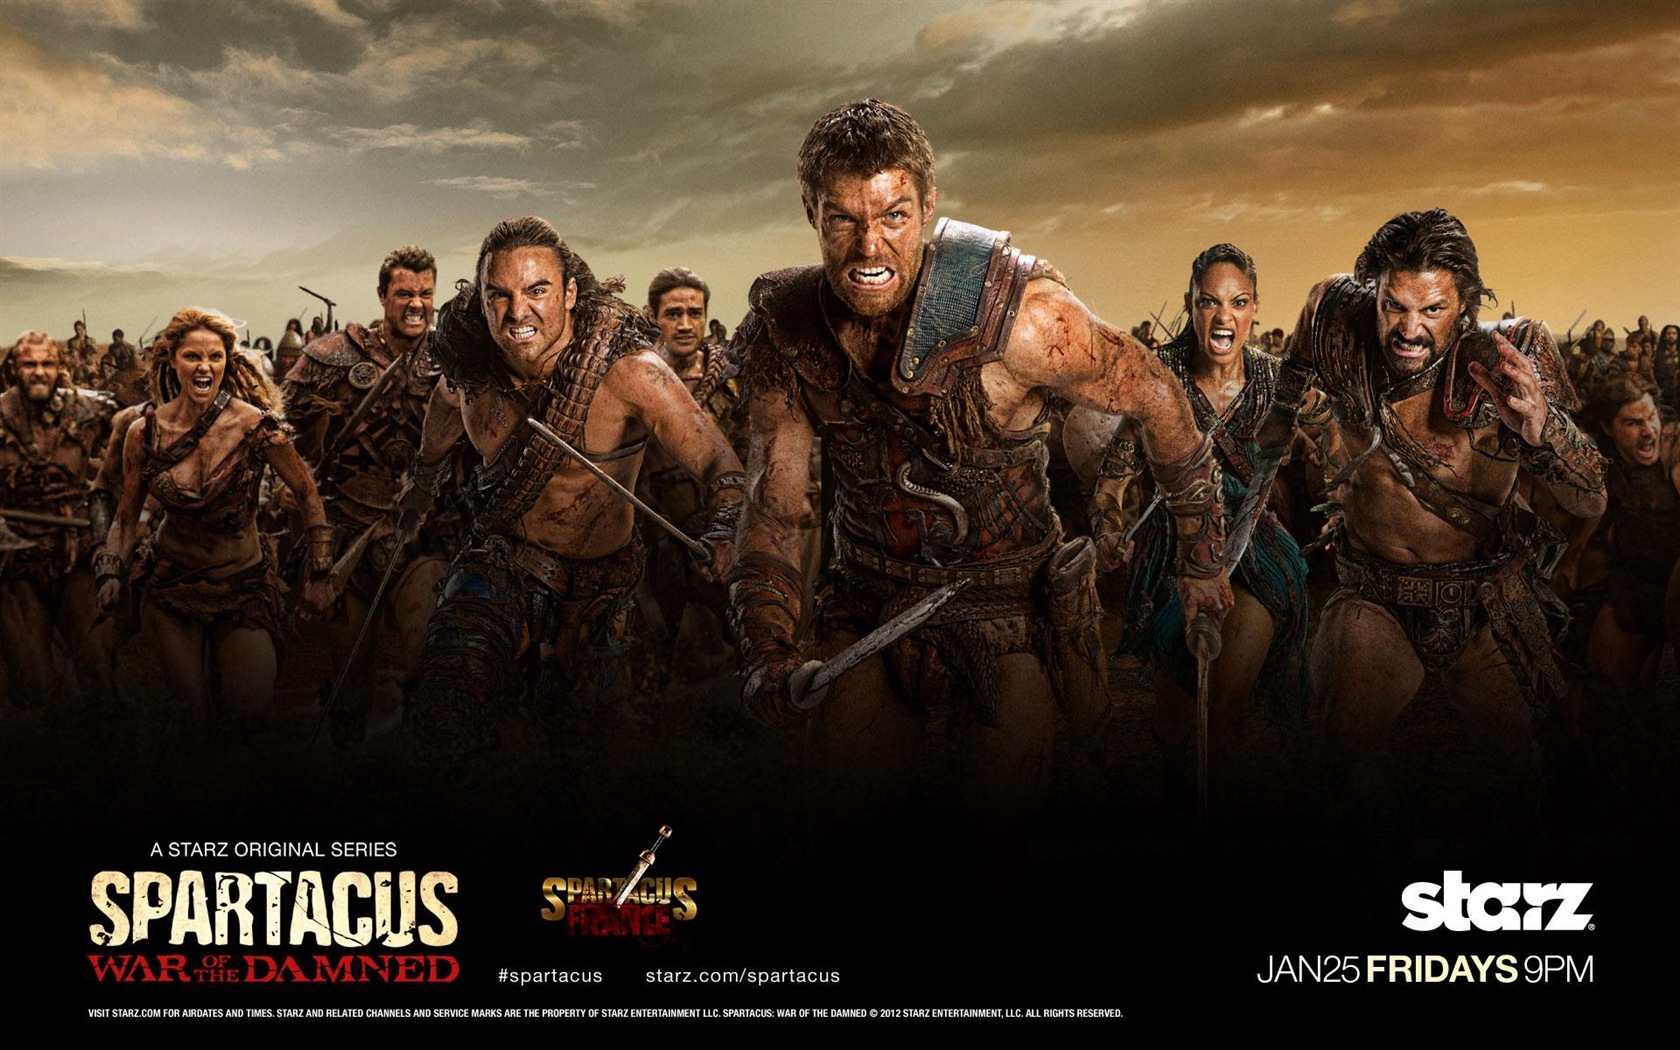 Spartacus: War of the Damned HD Wallpaper #1 - 1680x1050